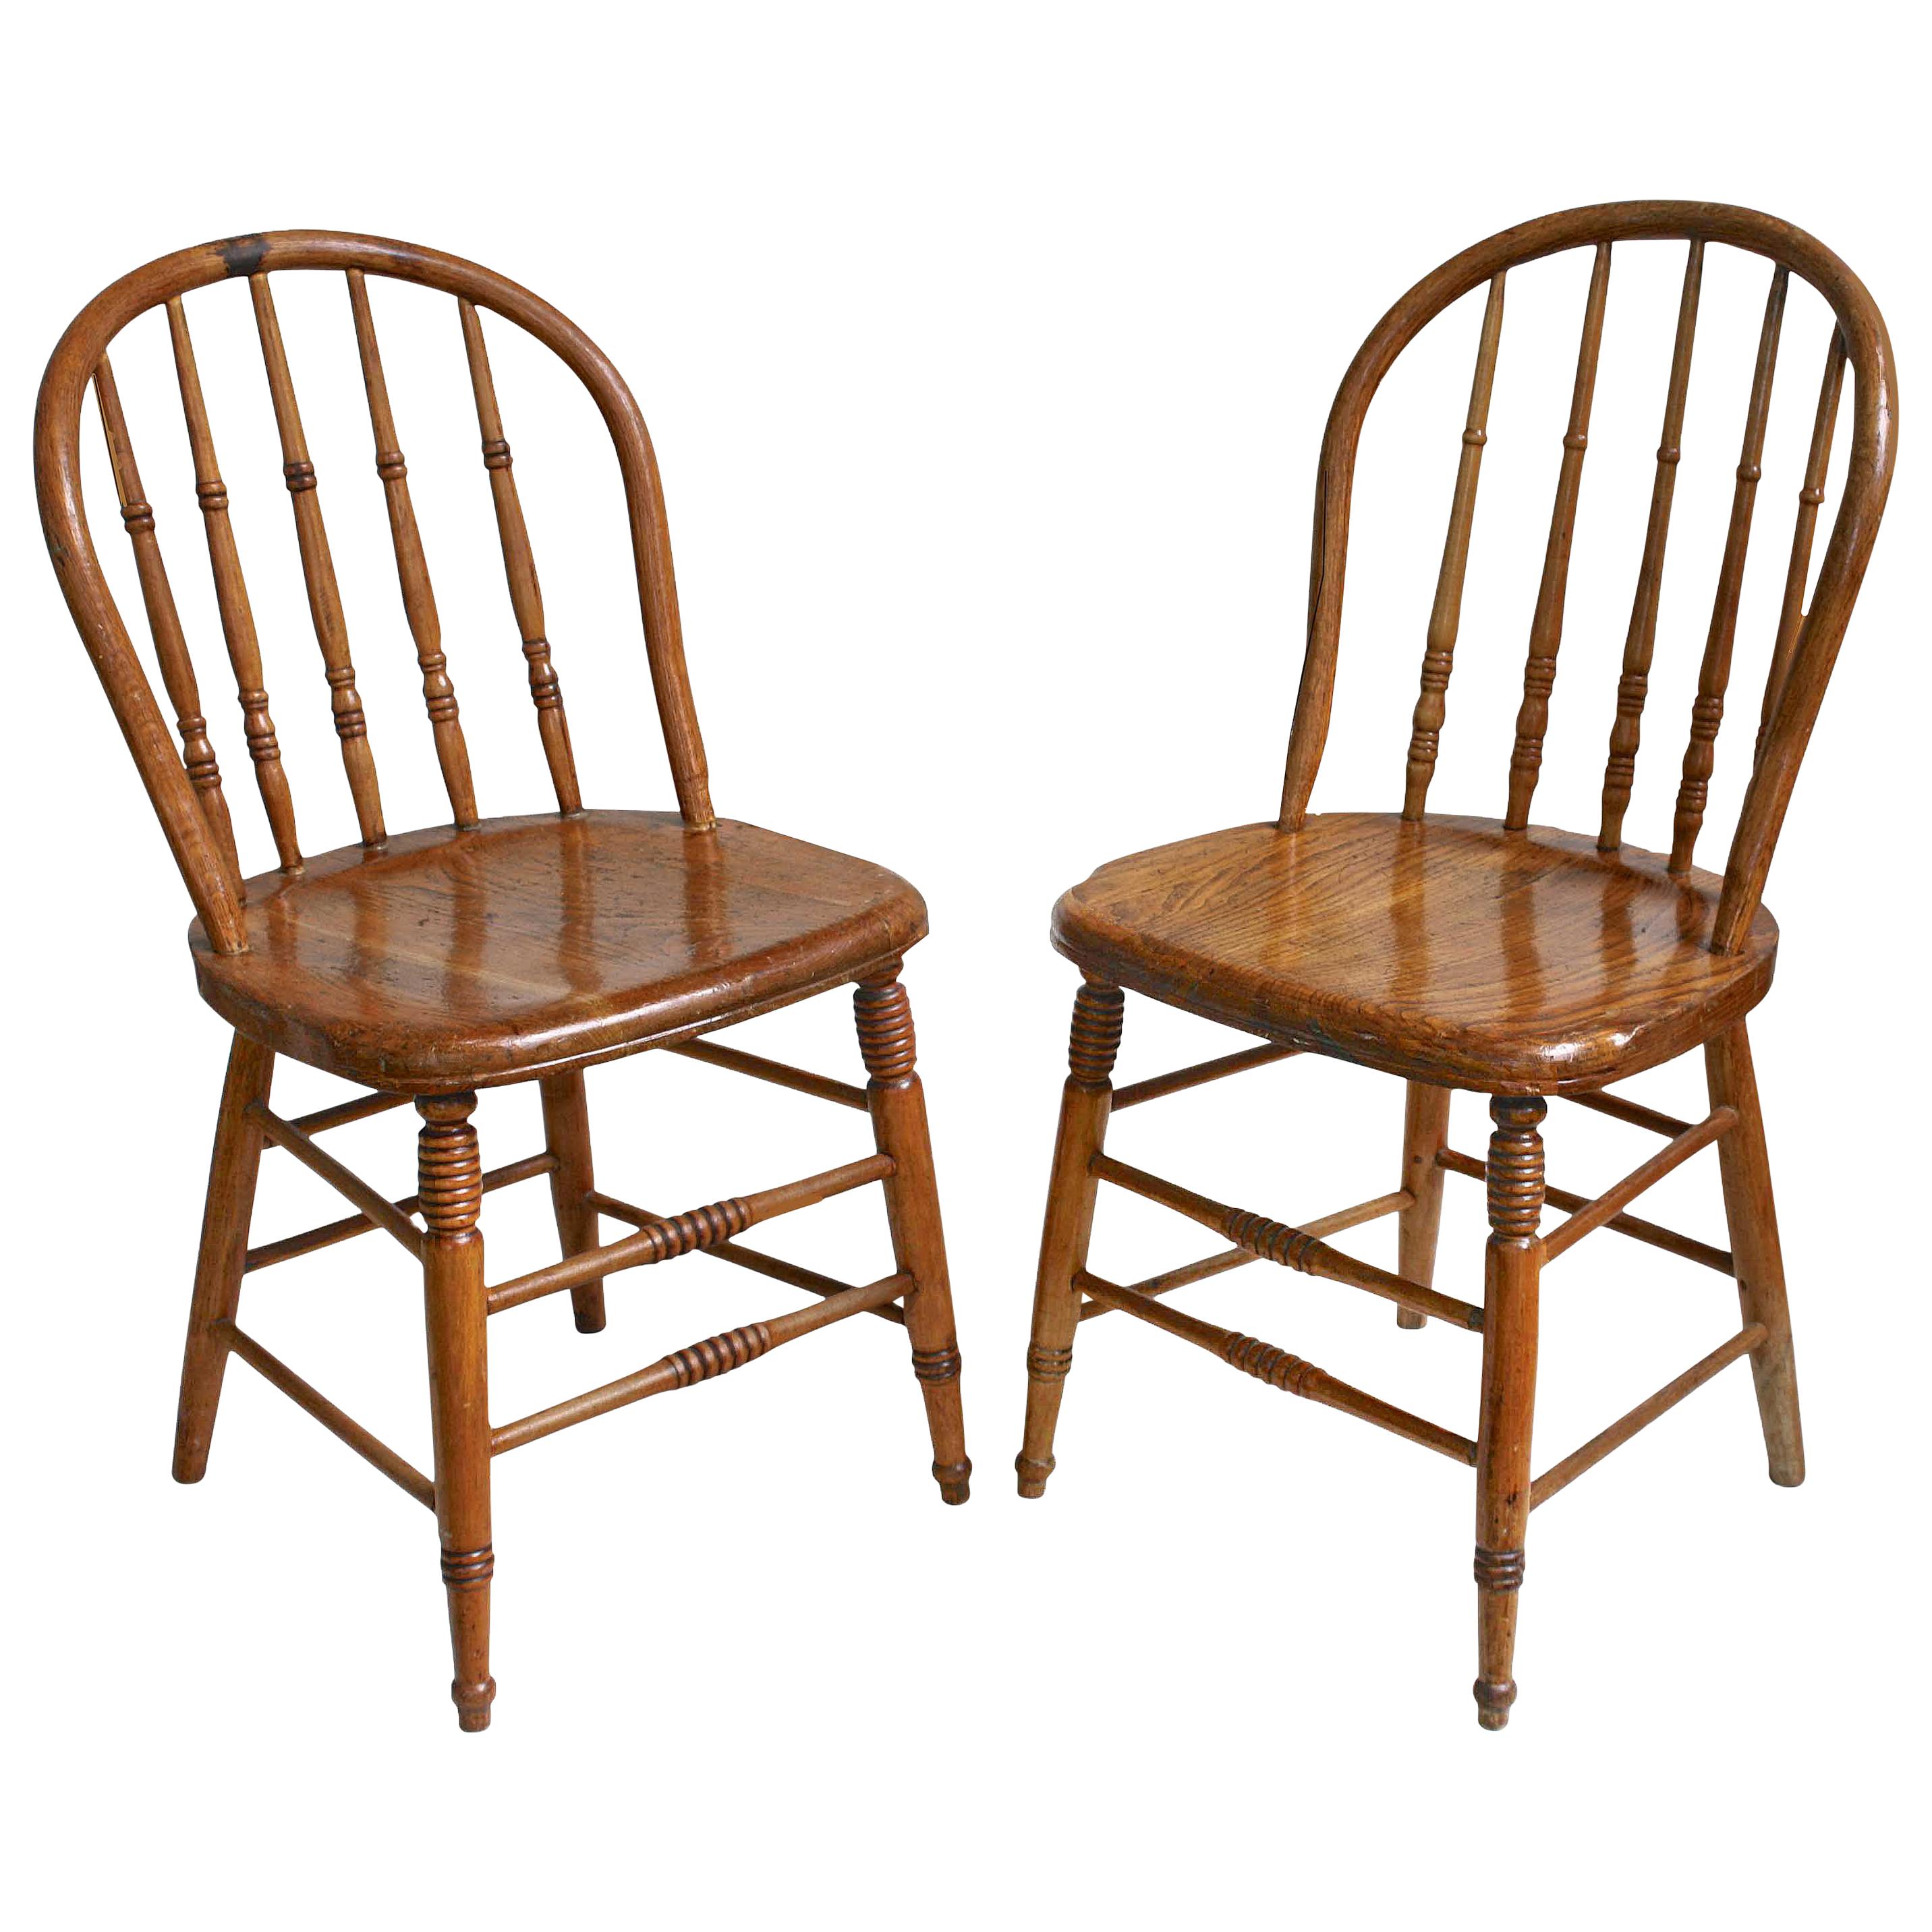 TEN Connecticut Hoop Back Windsor Chairs For Sale